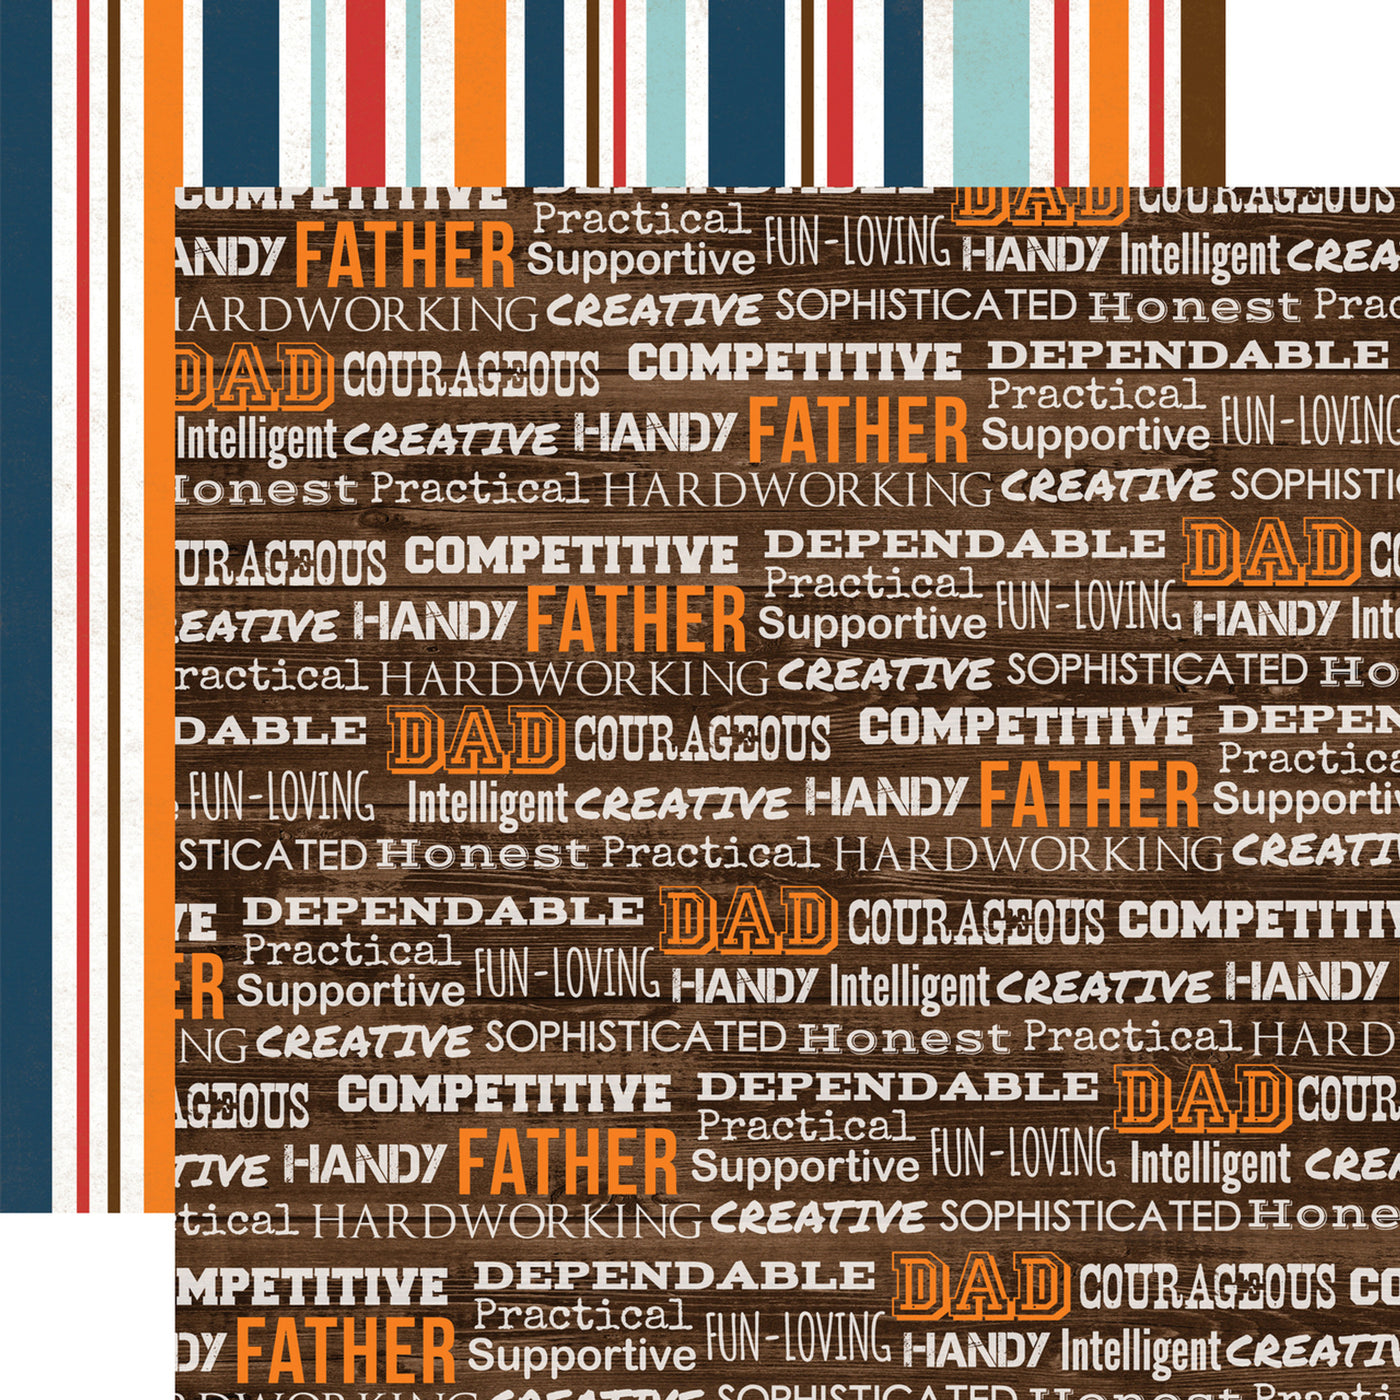 (Side A - descriptive words about Fathers on a woodgrain background, Side B - stripes pattern in blues, red, and orange)